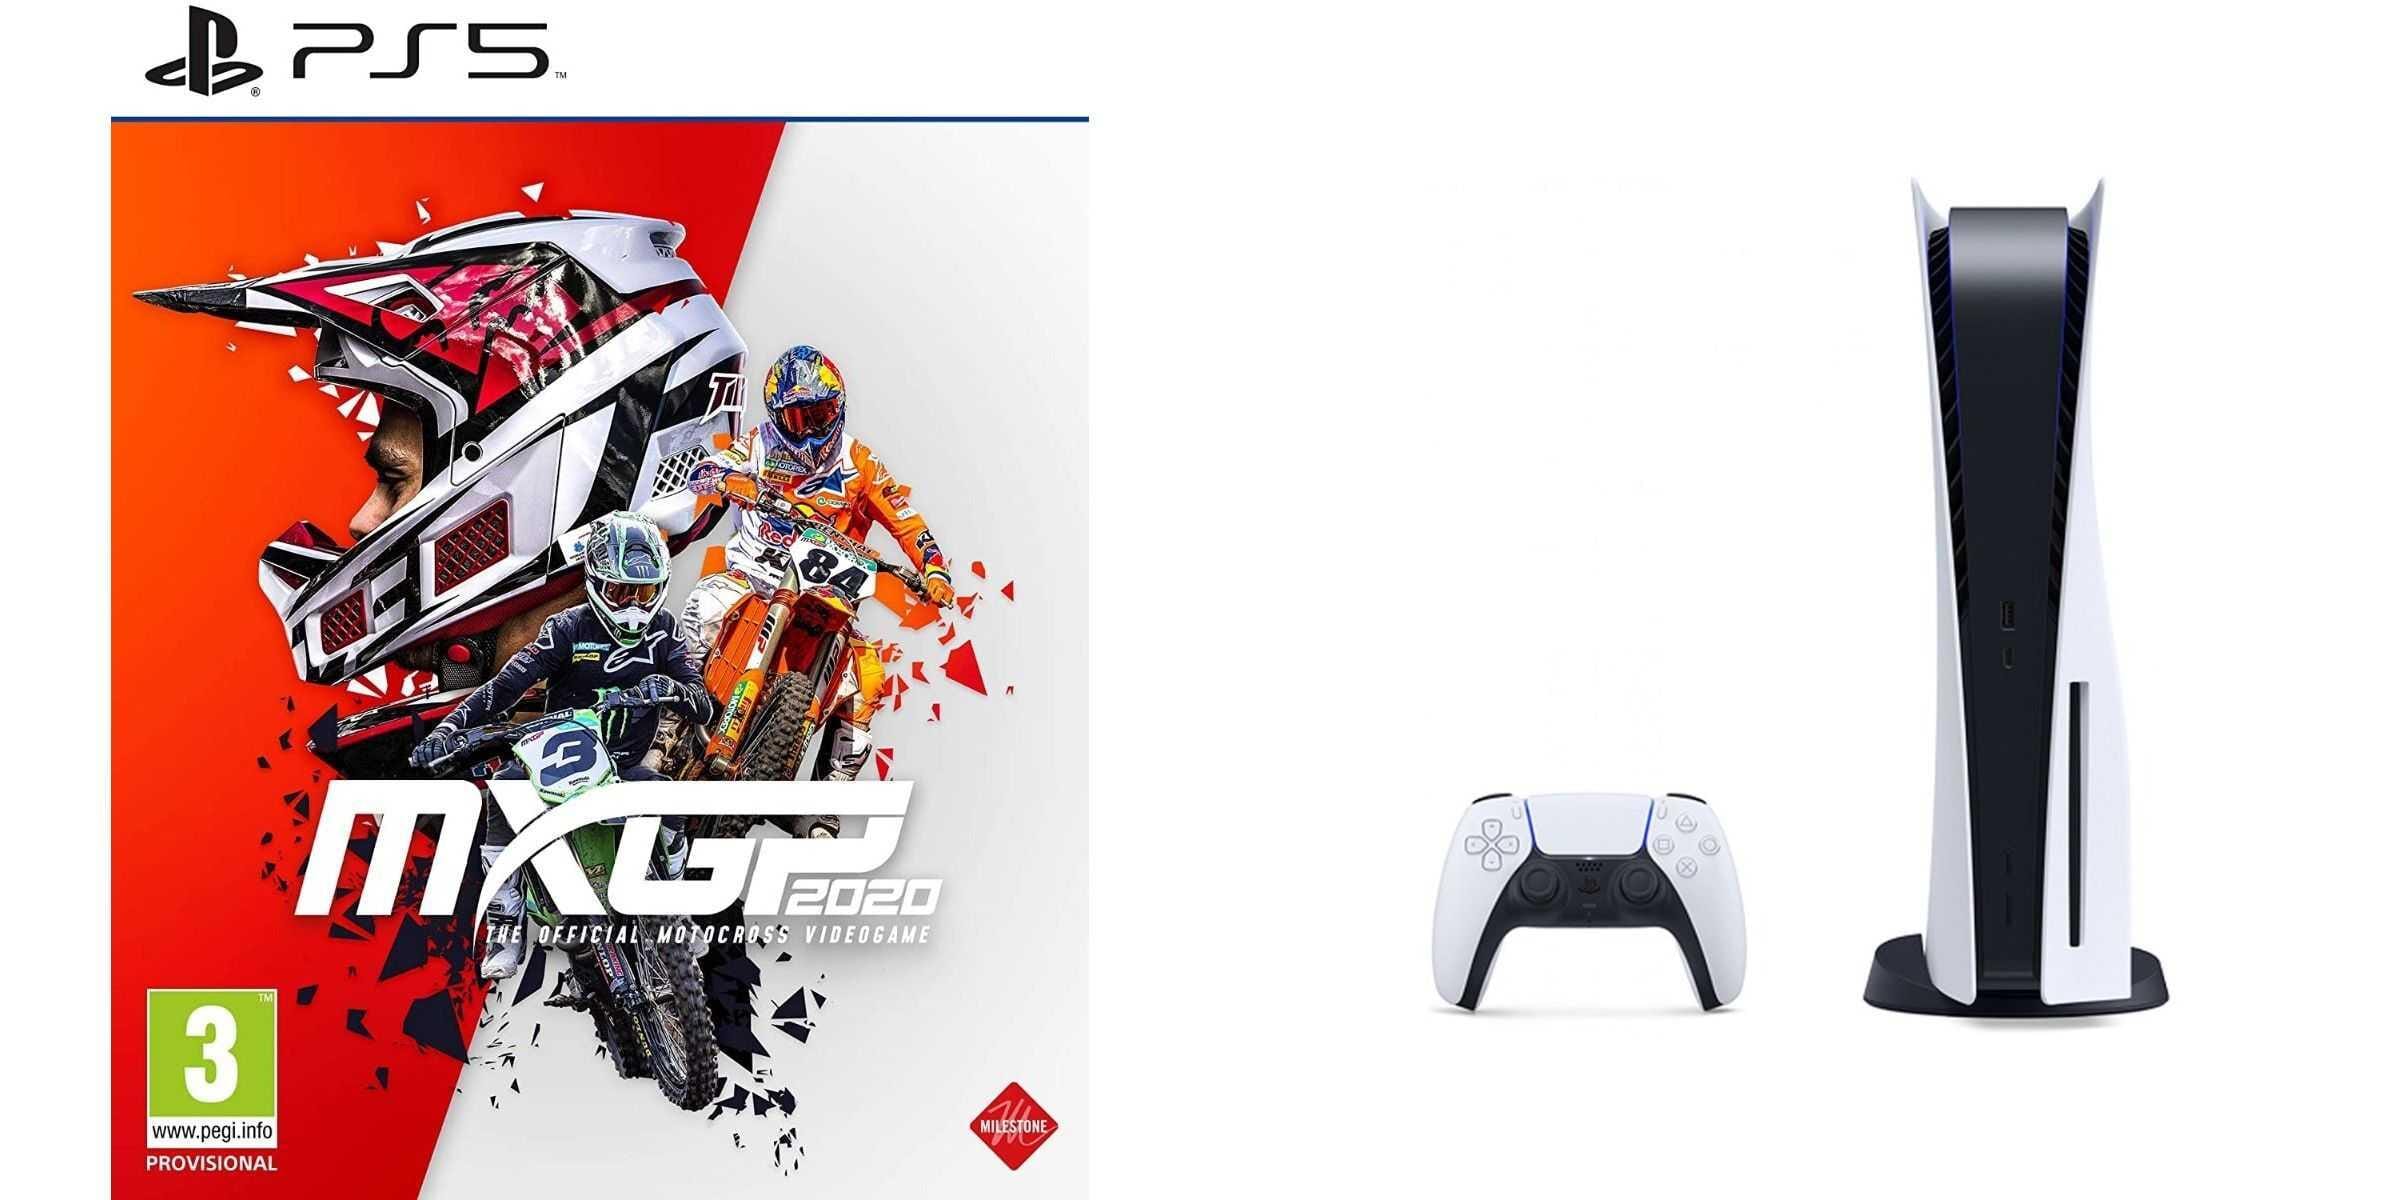 Sony PlayStation 5, 1 Wireless Controller, White - CFI-1016A01 MEE, with MXGP 2020 The Official Motocross Videogame for PlayStation 5